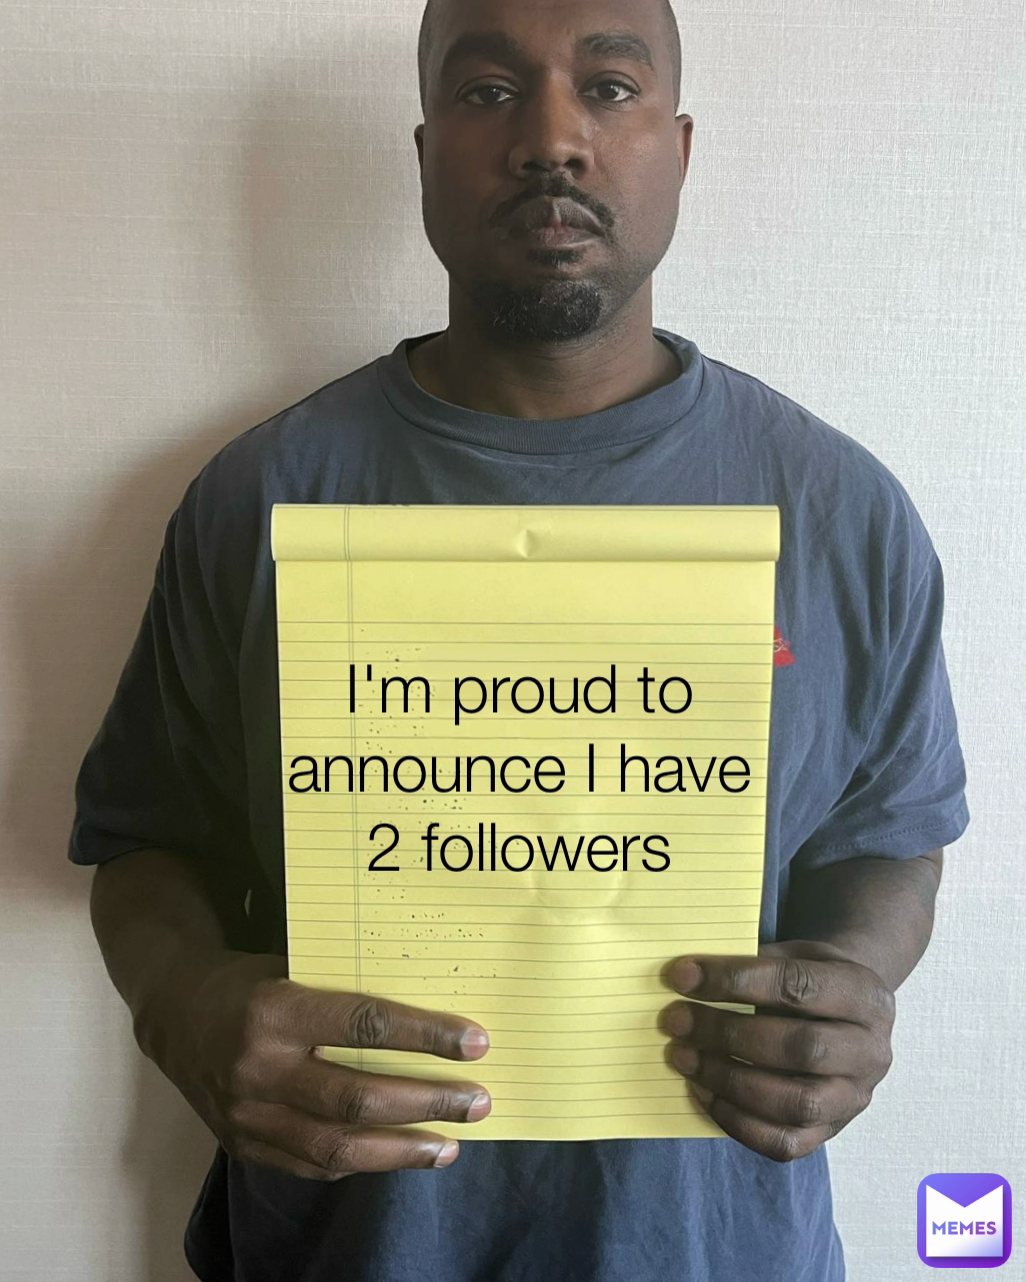 I'm proud to announce I have 2 followers